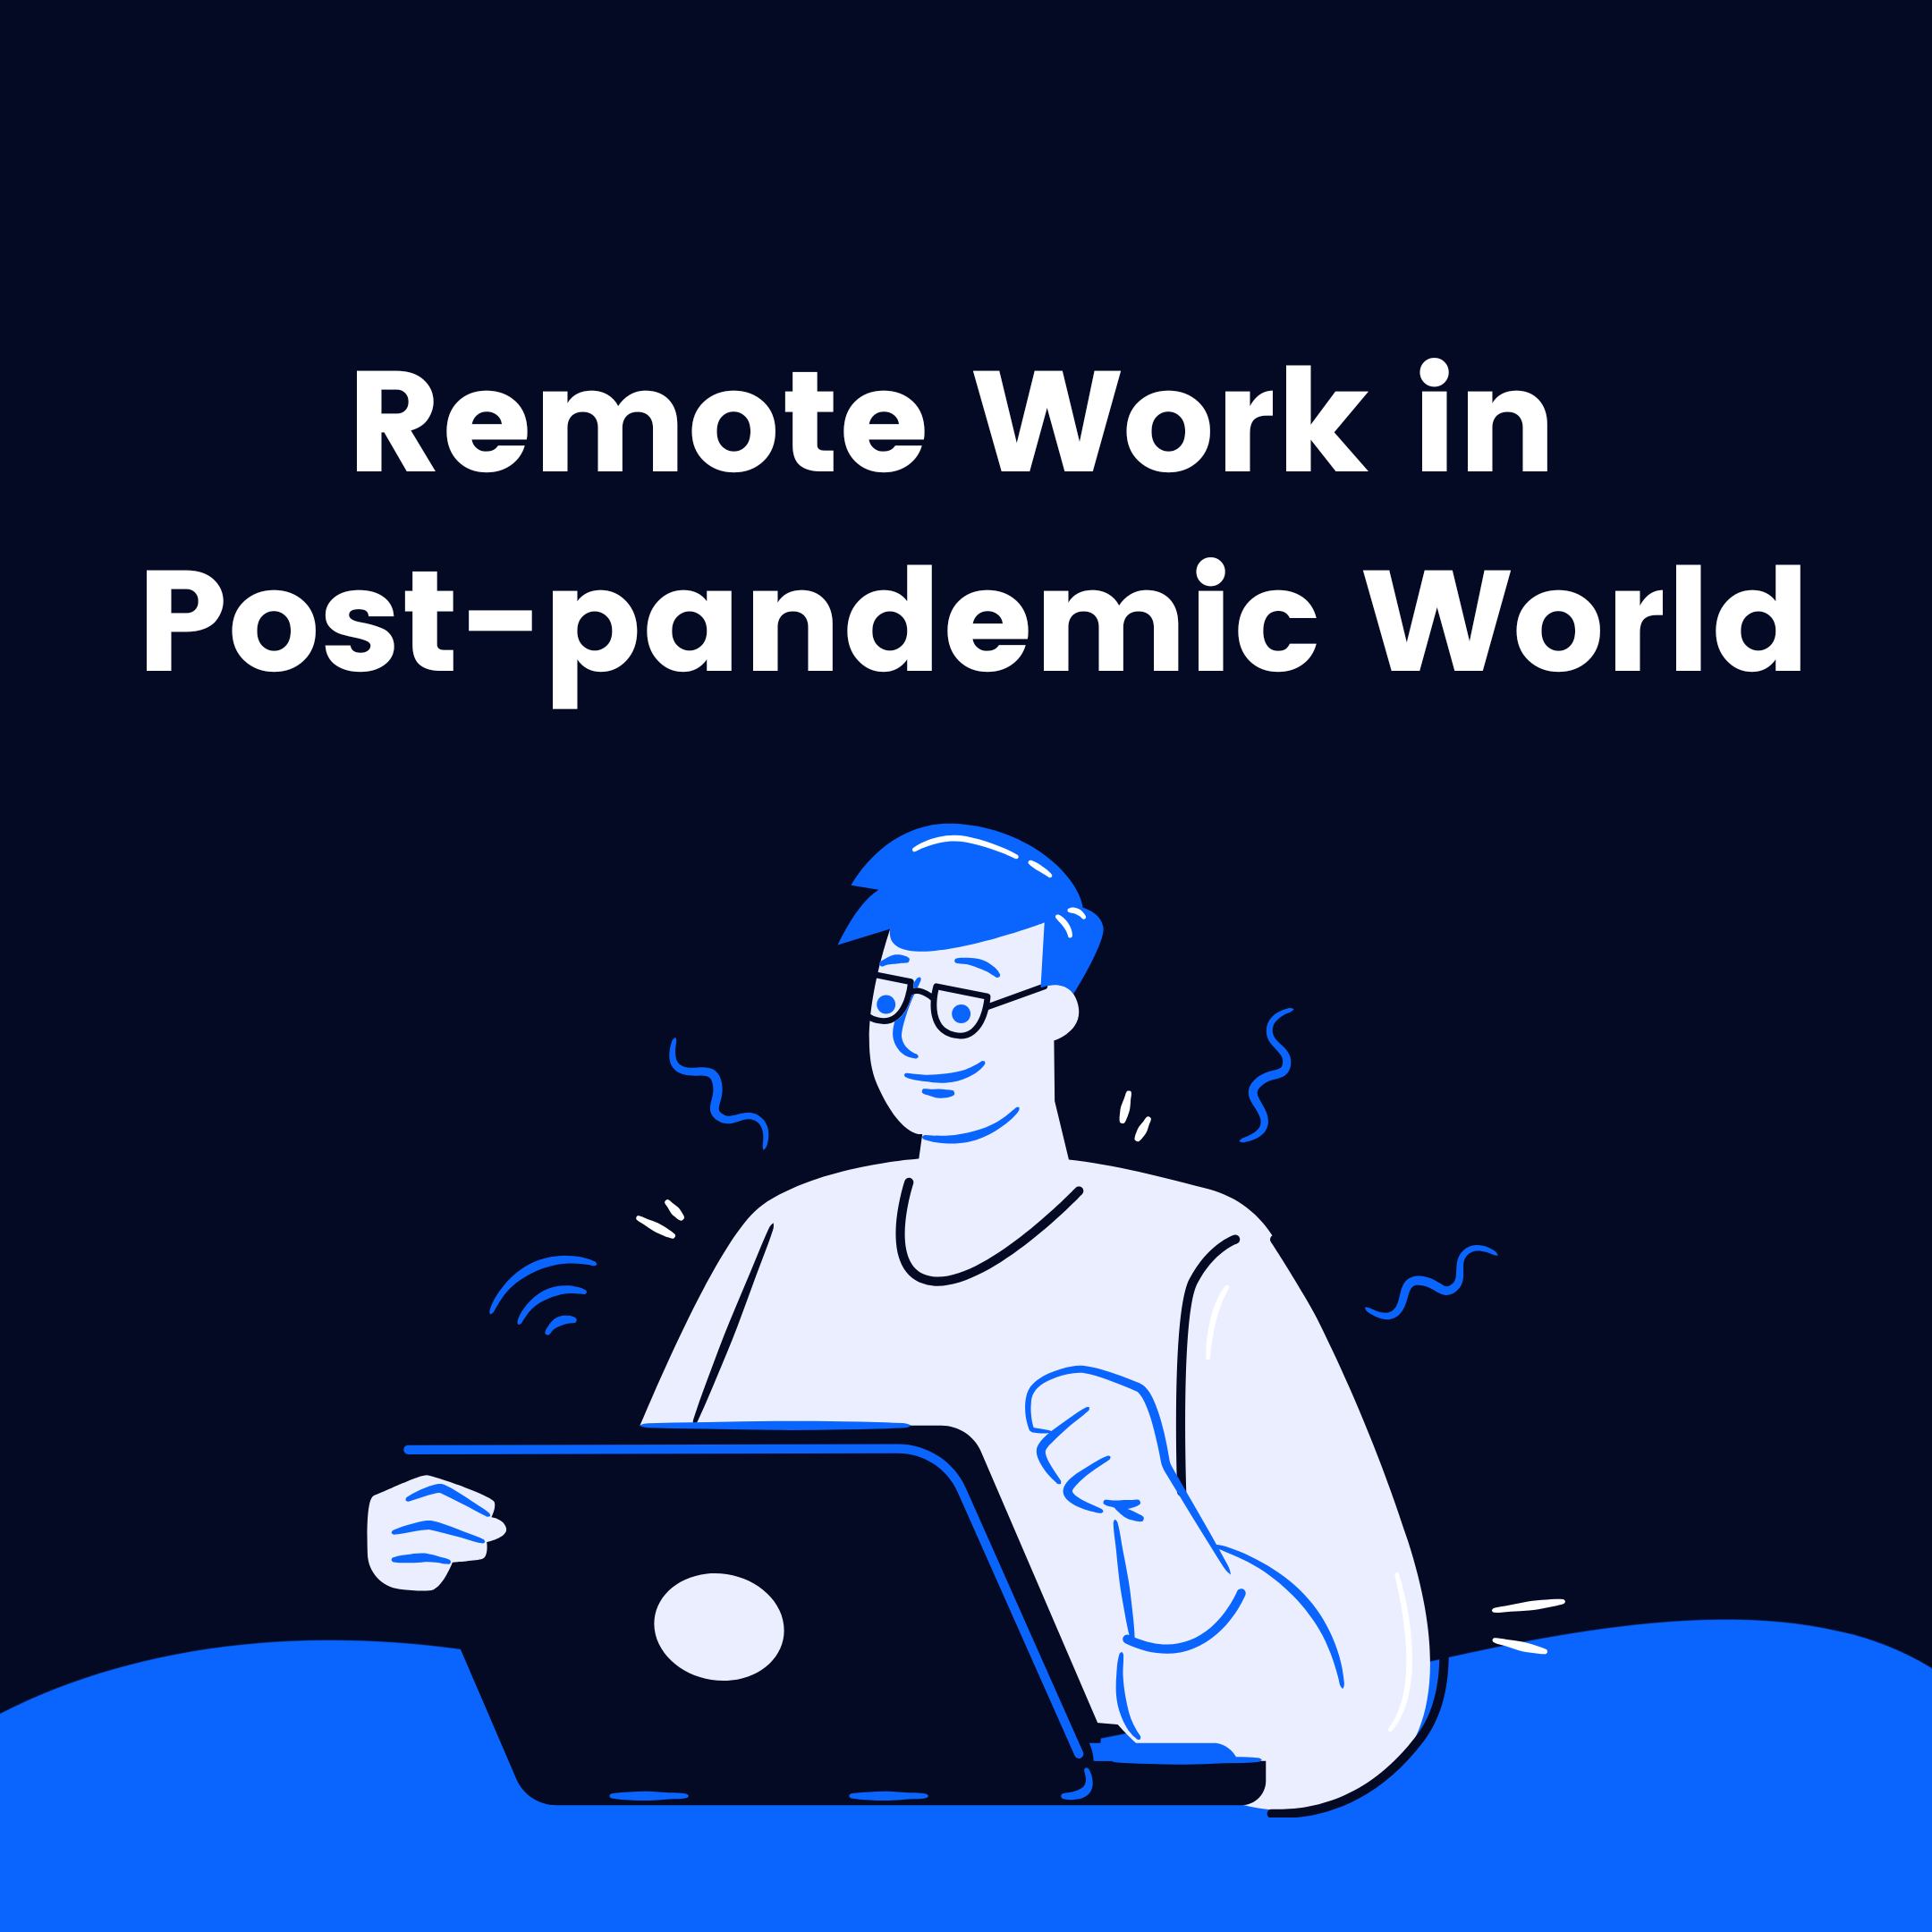 Remote work in post-pandemic world